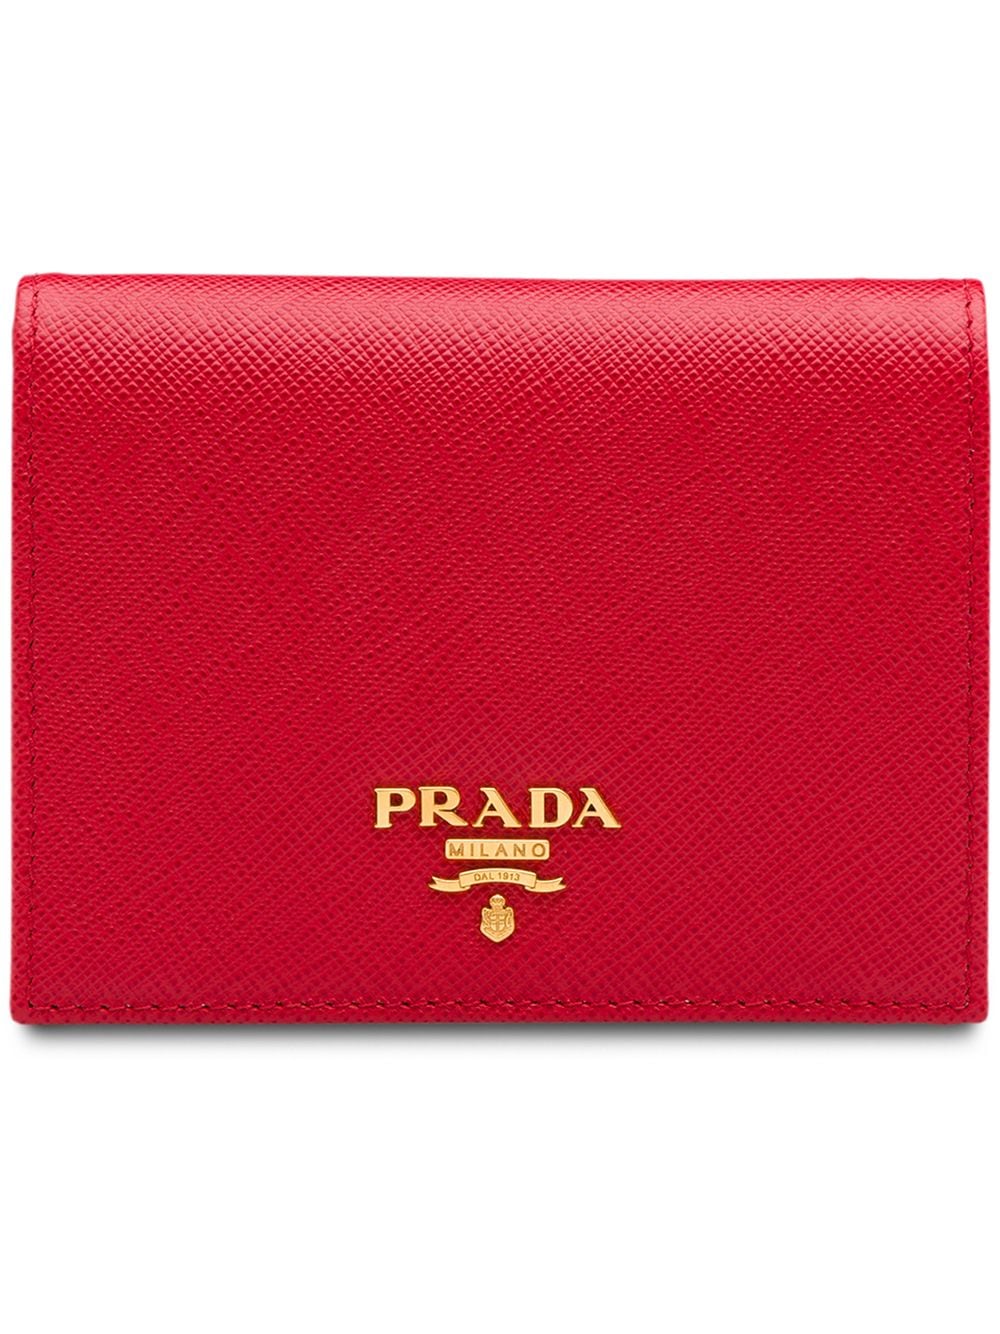 Prada small Saffiano leather wallet - ShopStyle